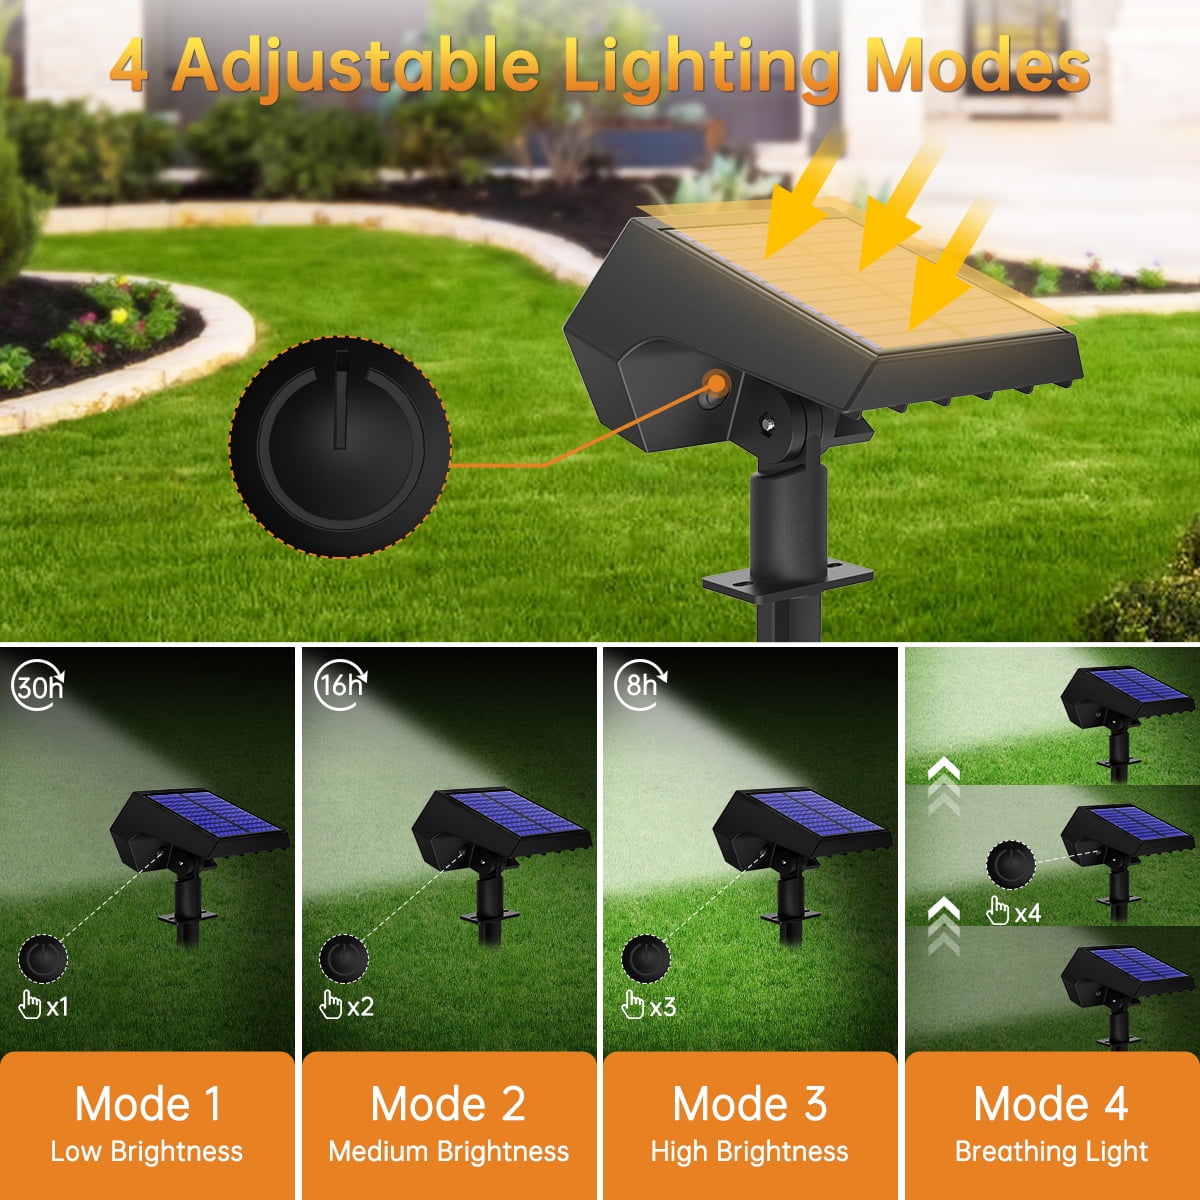 Dazhengyang Solar Lights Outdoor LED Spotlights,2-in-1 Rotable Dual Landscape and Wall Lights,12-LED Motion Sensor Security Lights,Bright Waterproof LED Lighting for Yard Driveway Patio Garden 